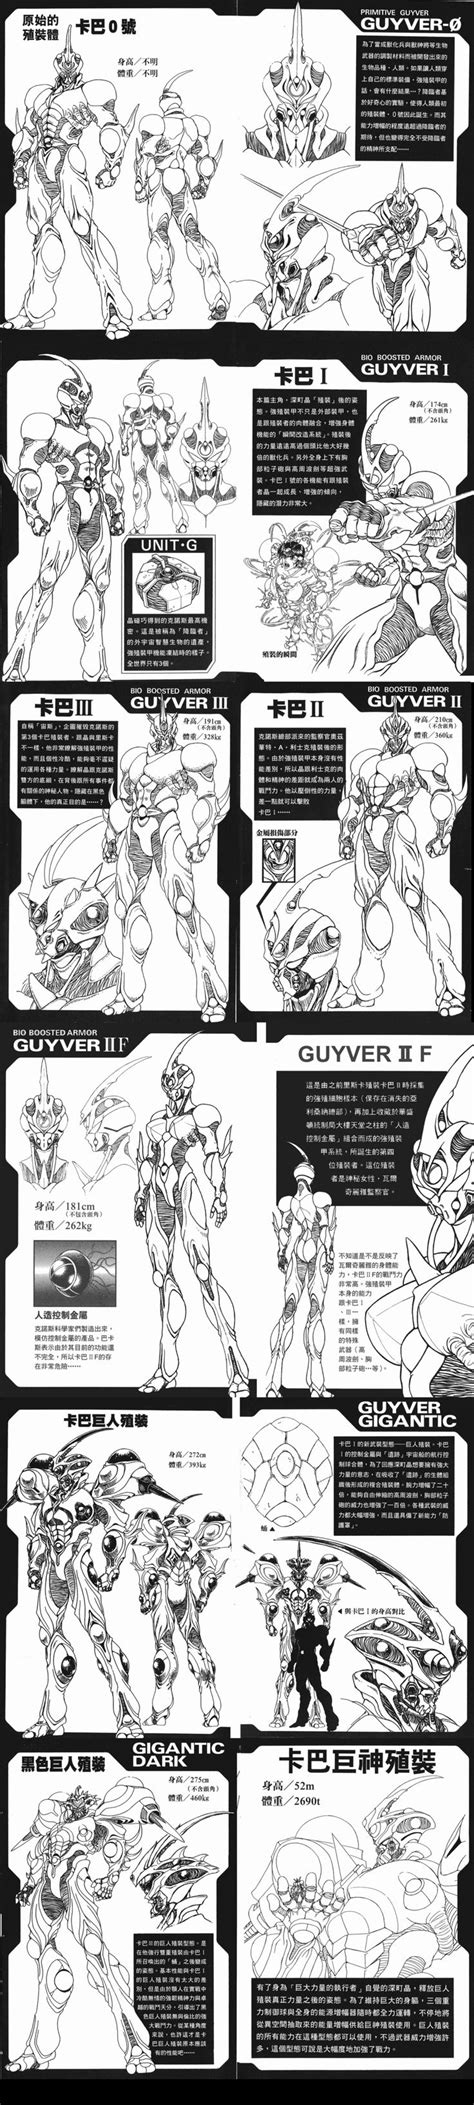 Unidades Guyver By Alkan On DeviantART Sci Fi Concept Art Really Cool Drawings Comic